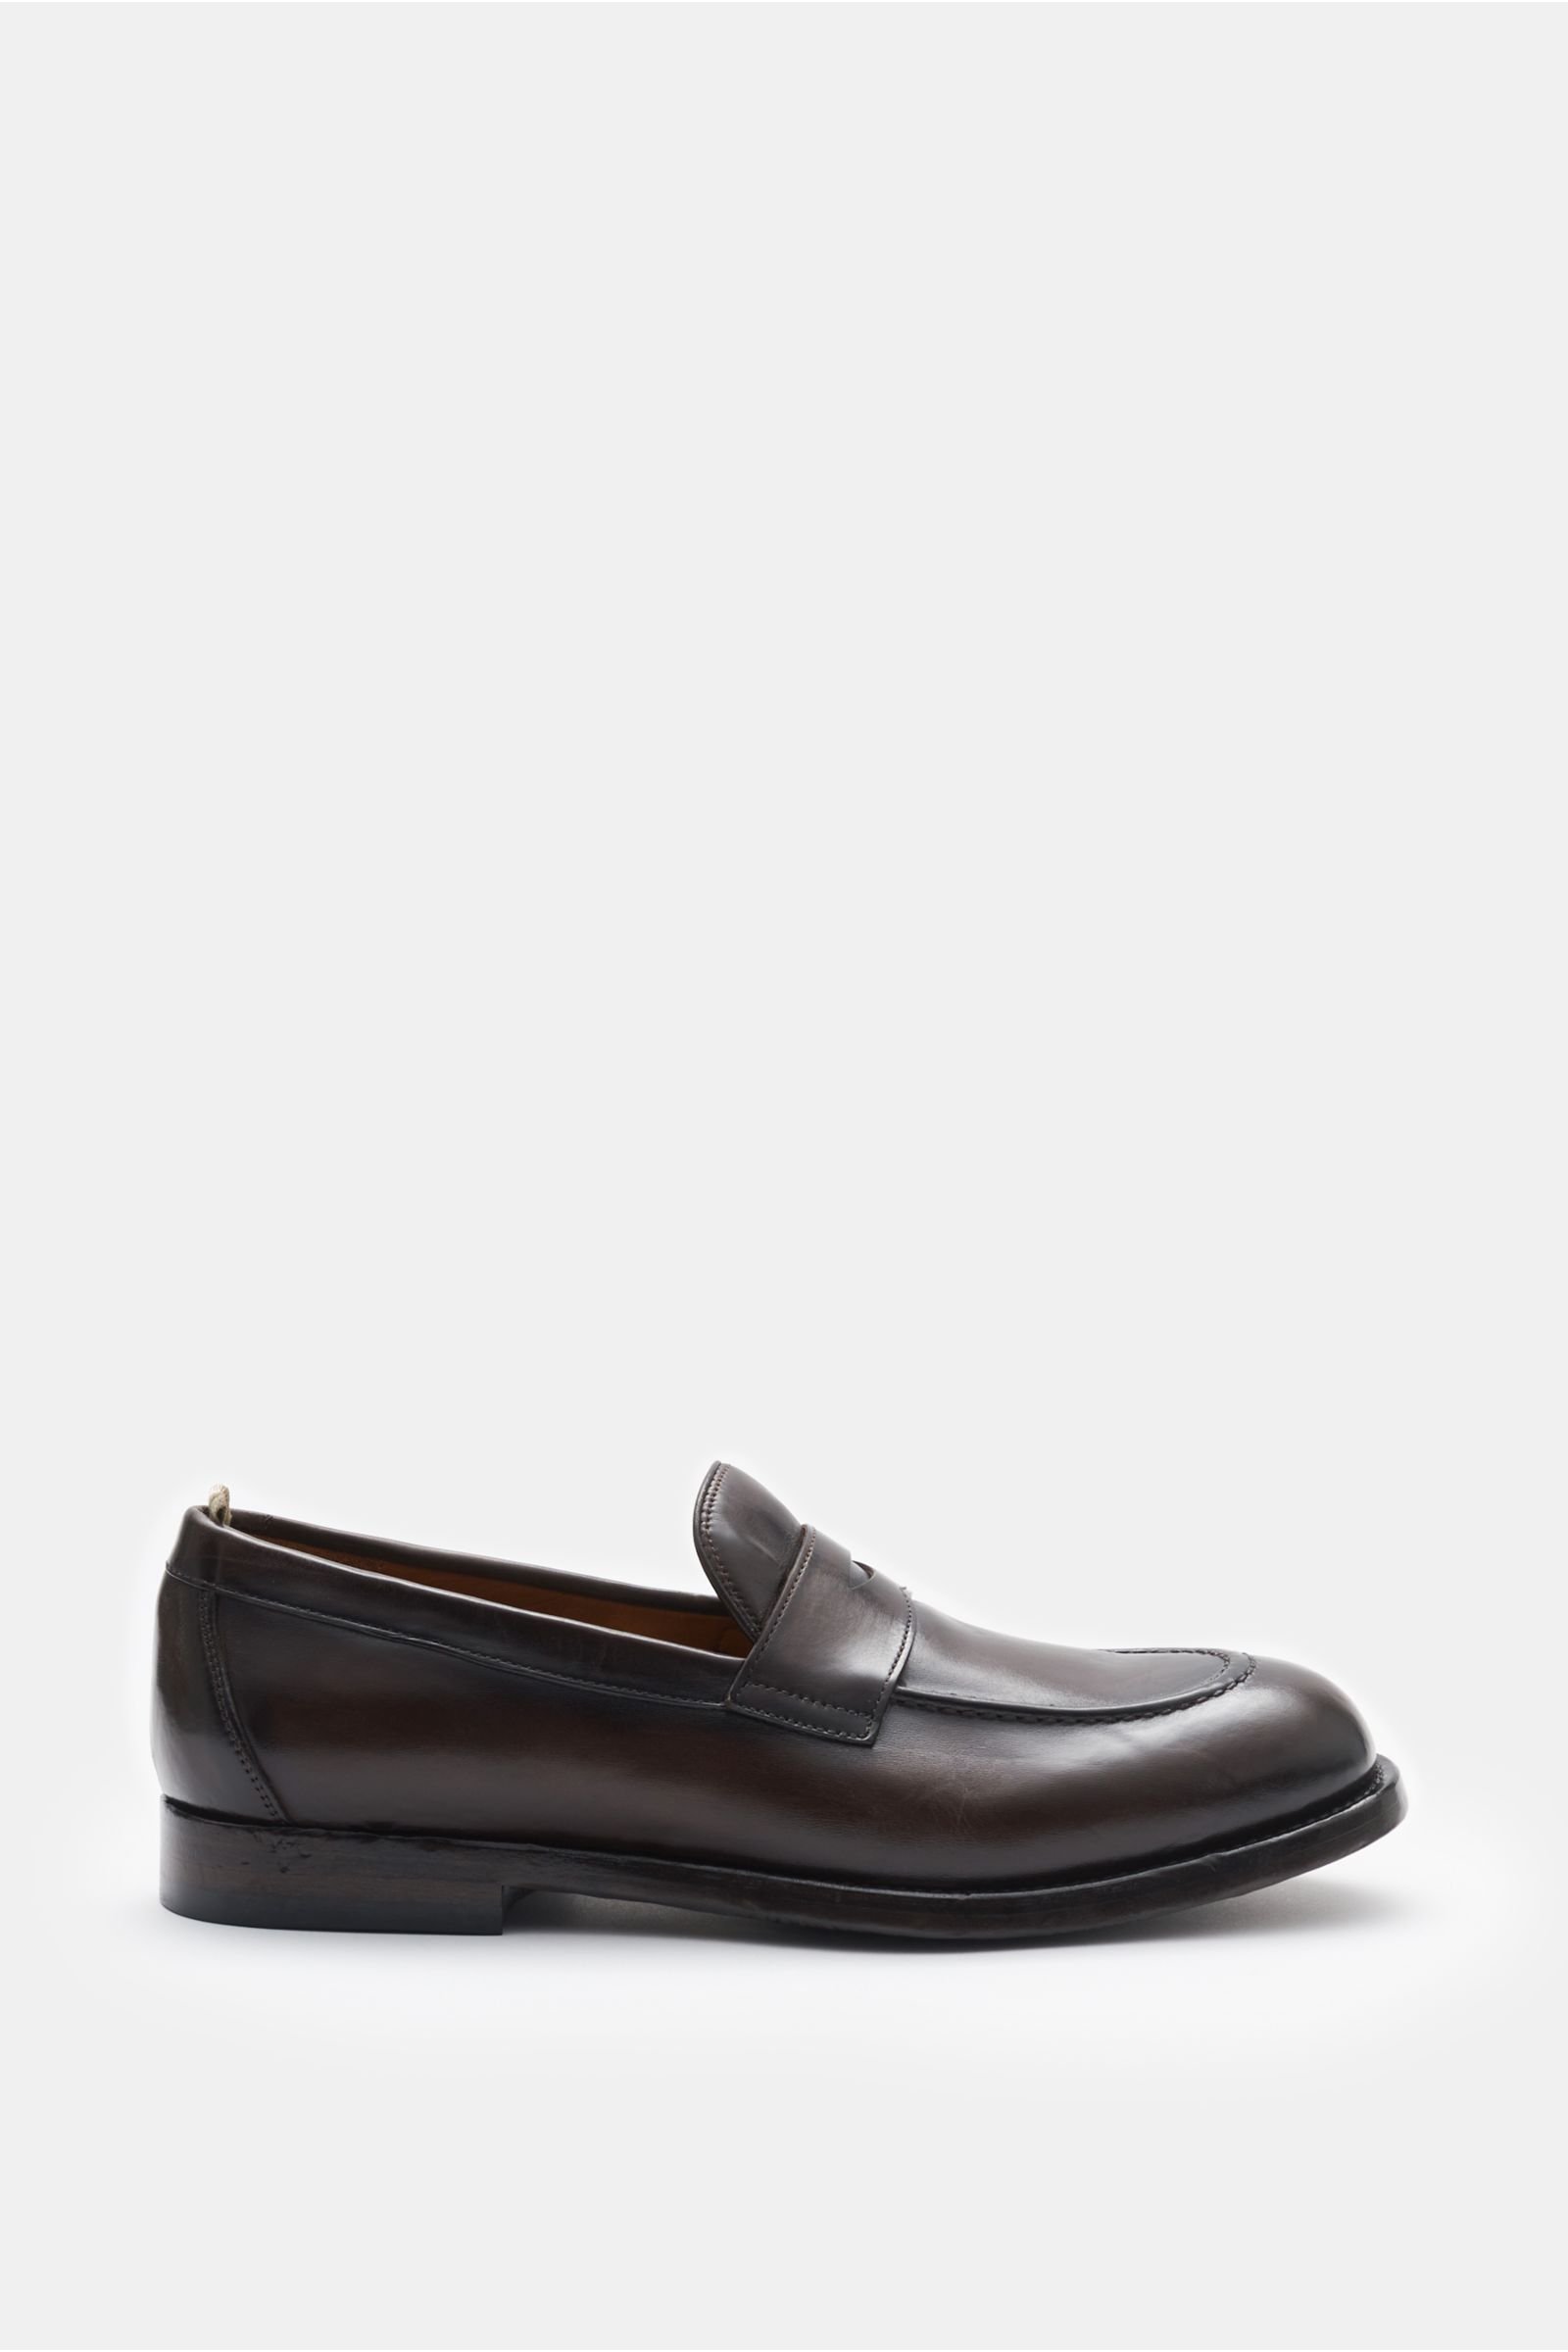 Penny loafers 'Ivy 004' dark brown